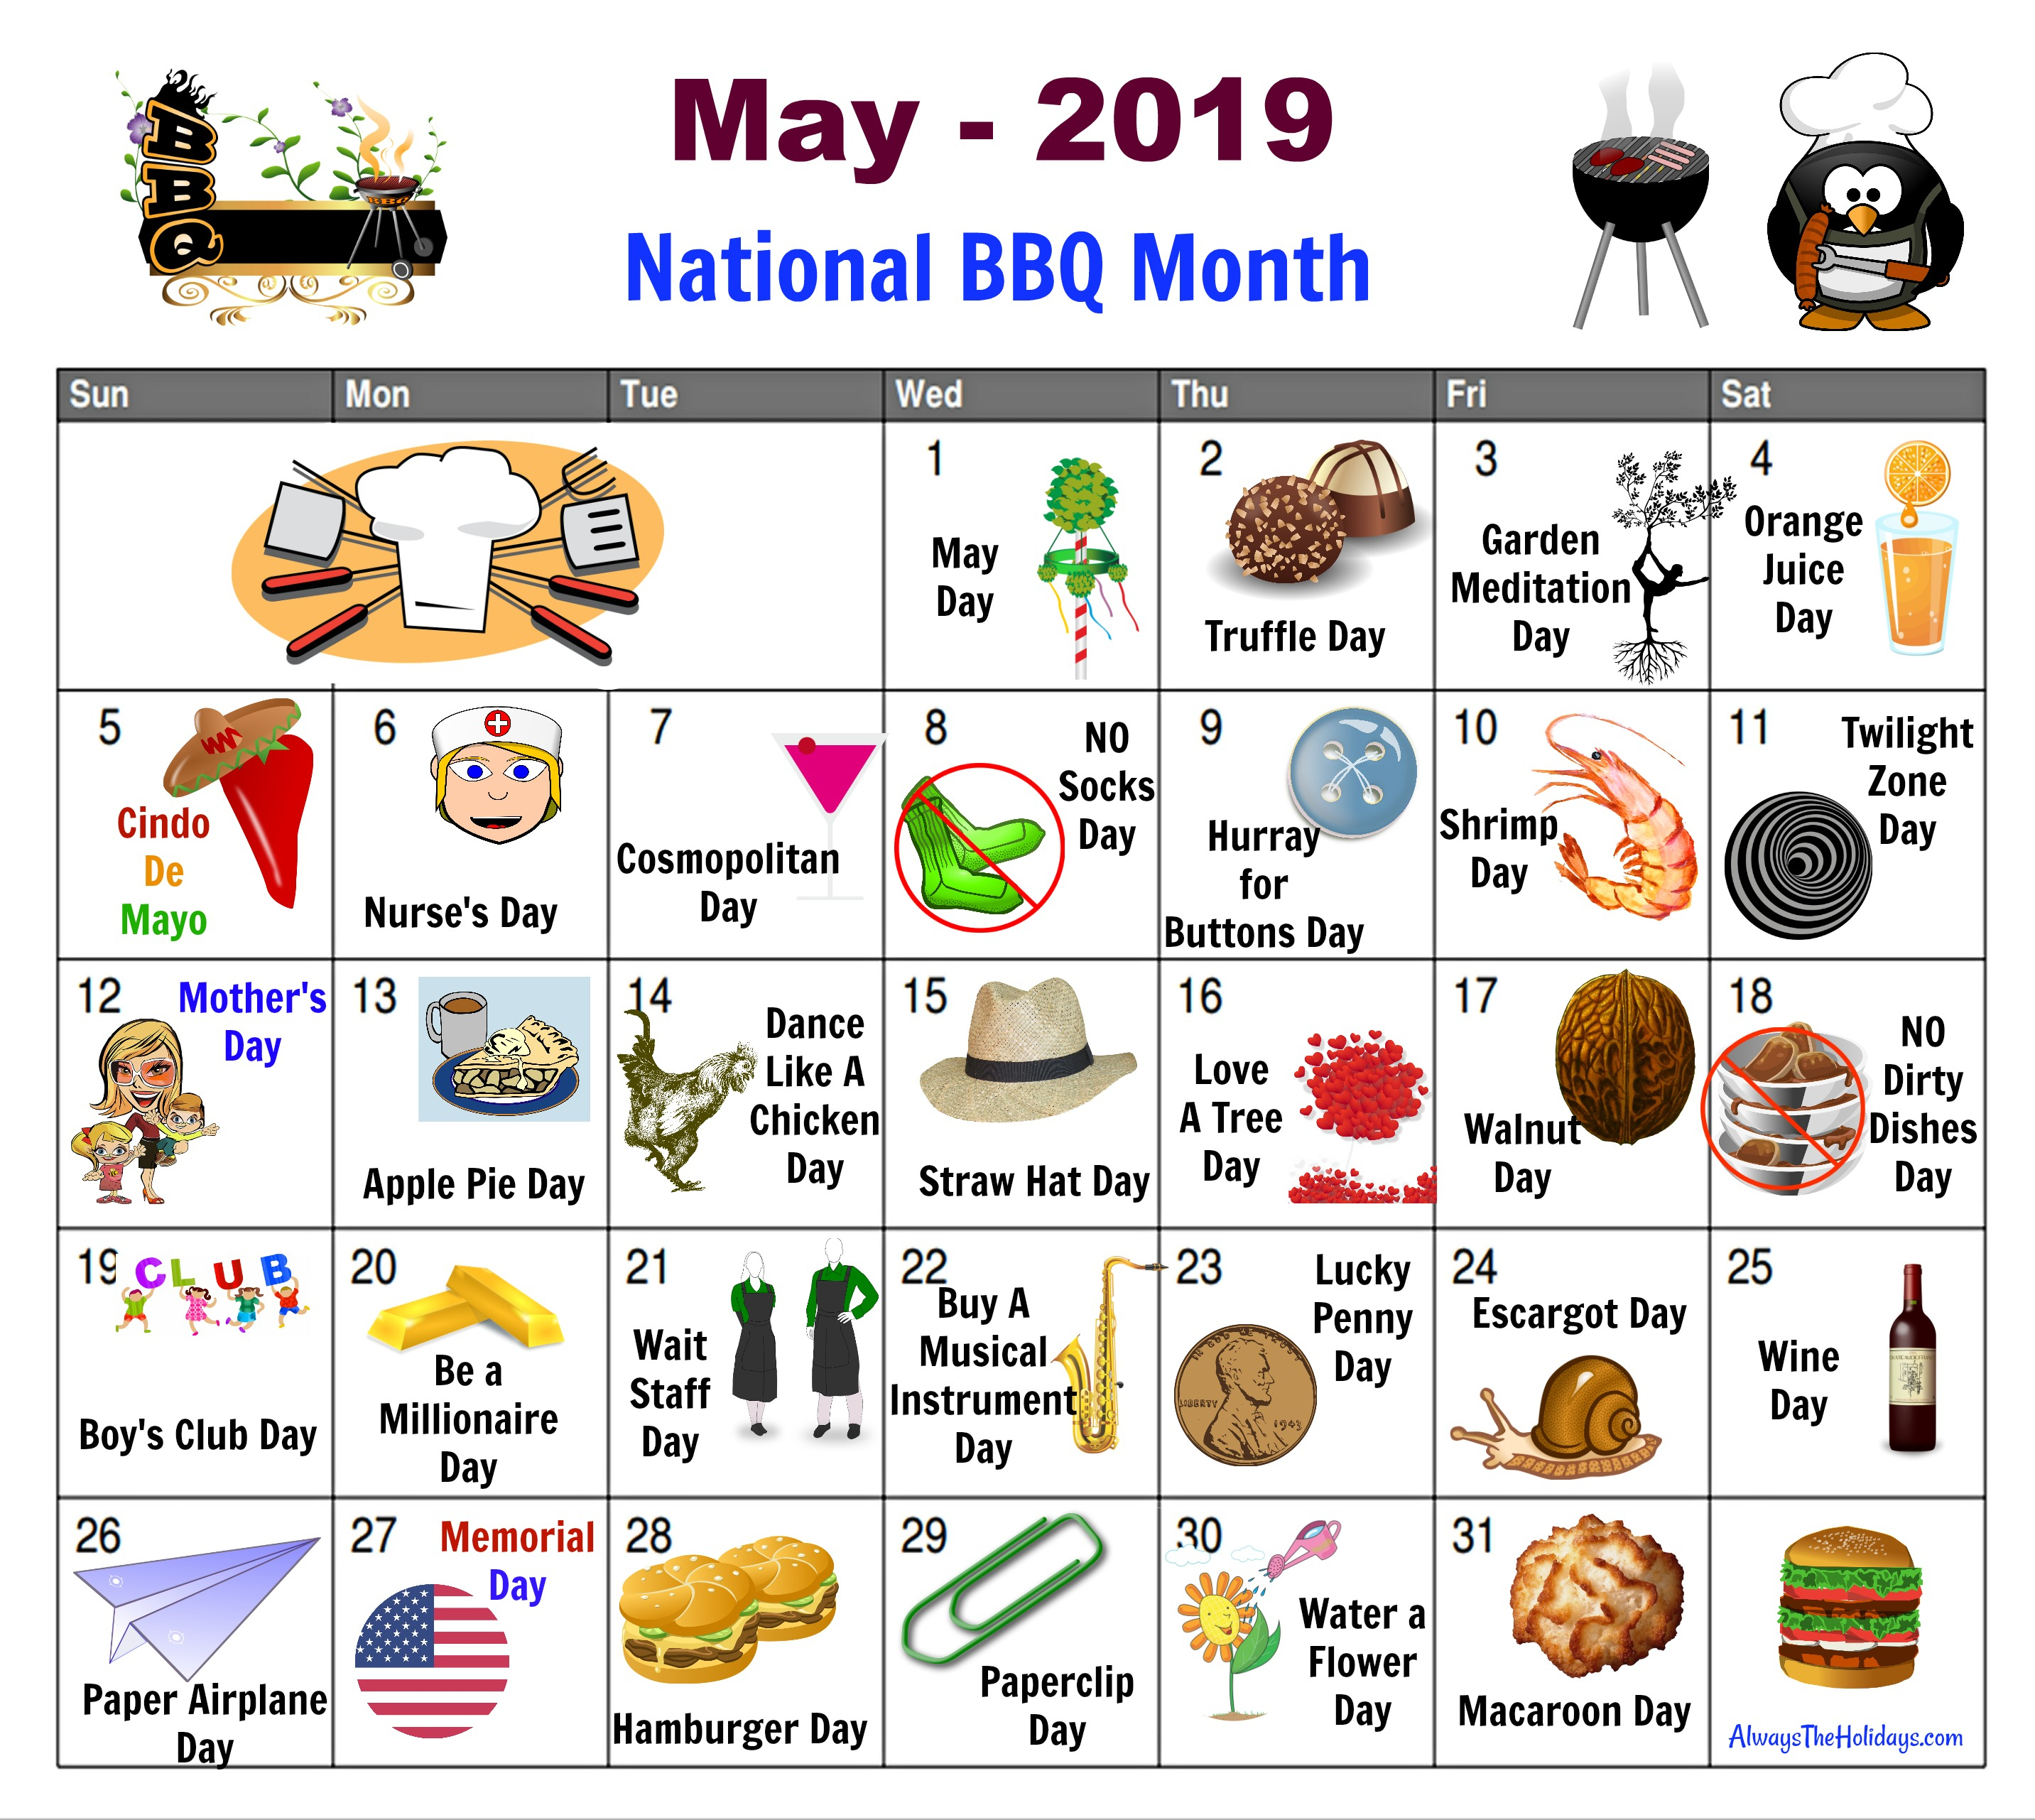 May National Day Calendar - Free Printable - Always The Holidays